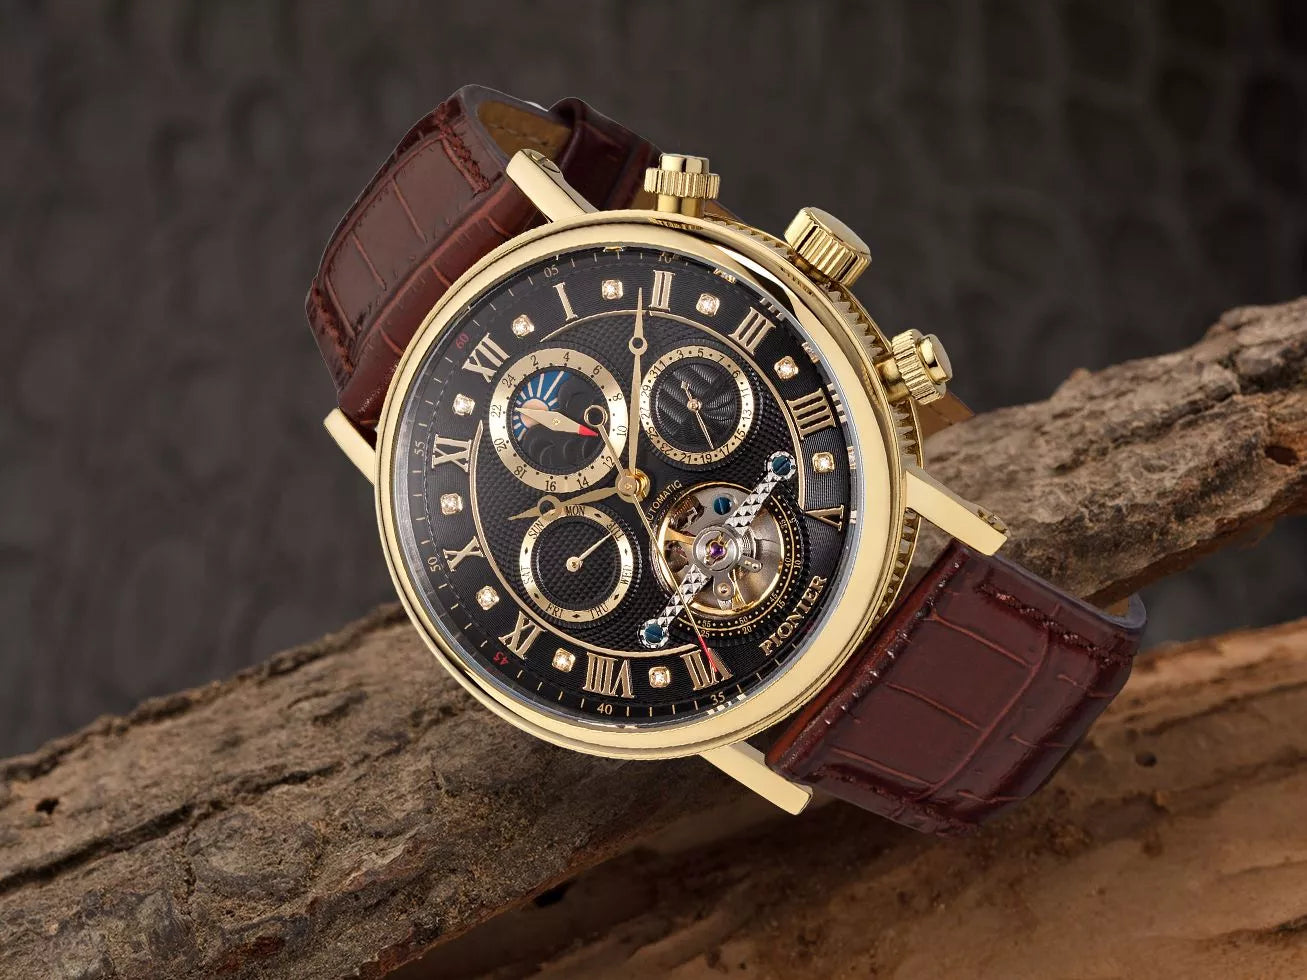 Gorgeous automatic watch made with premium materials and crafted with the latest engineering.